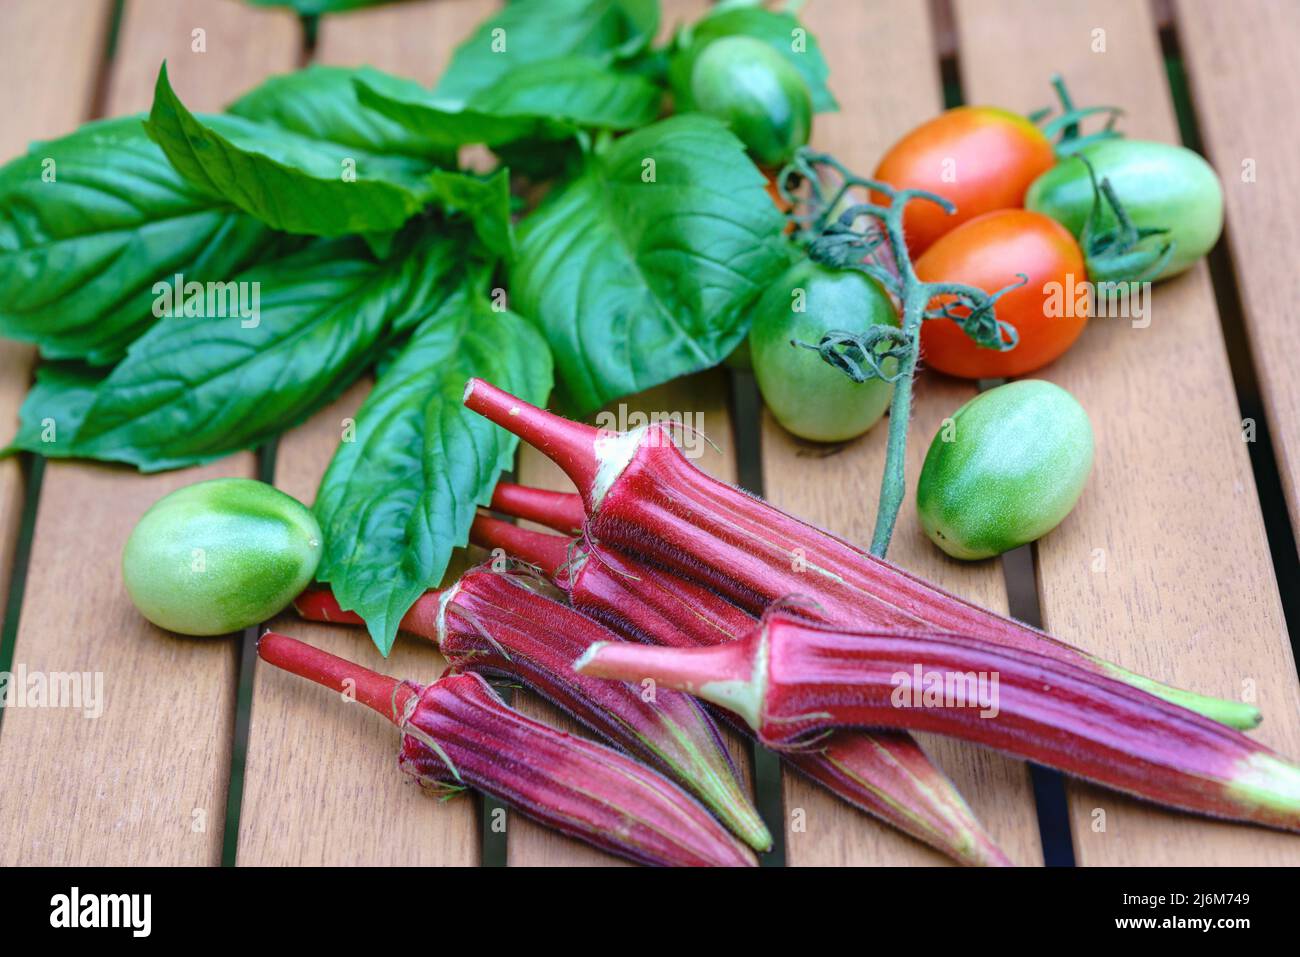 Freshly harvested basil, okra and tomatoes on a wood table outdoors, healthy living with organic vegetables and herbs. Stock Photo